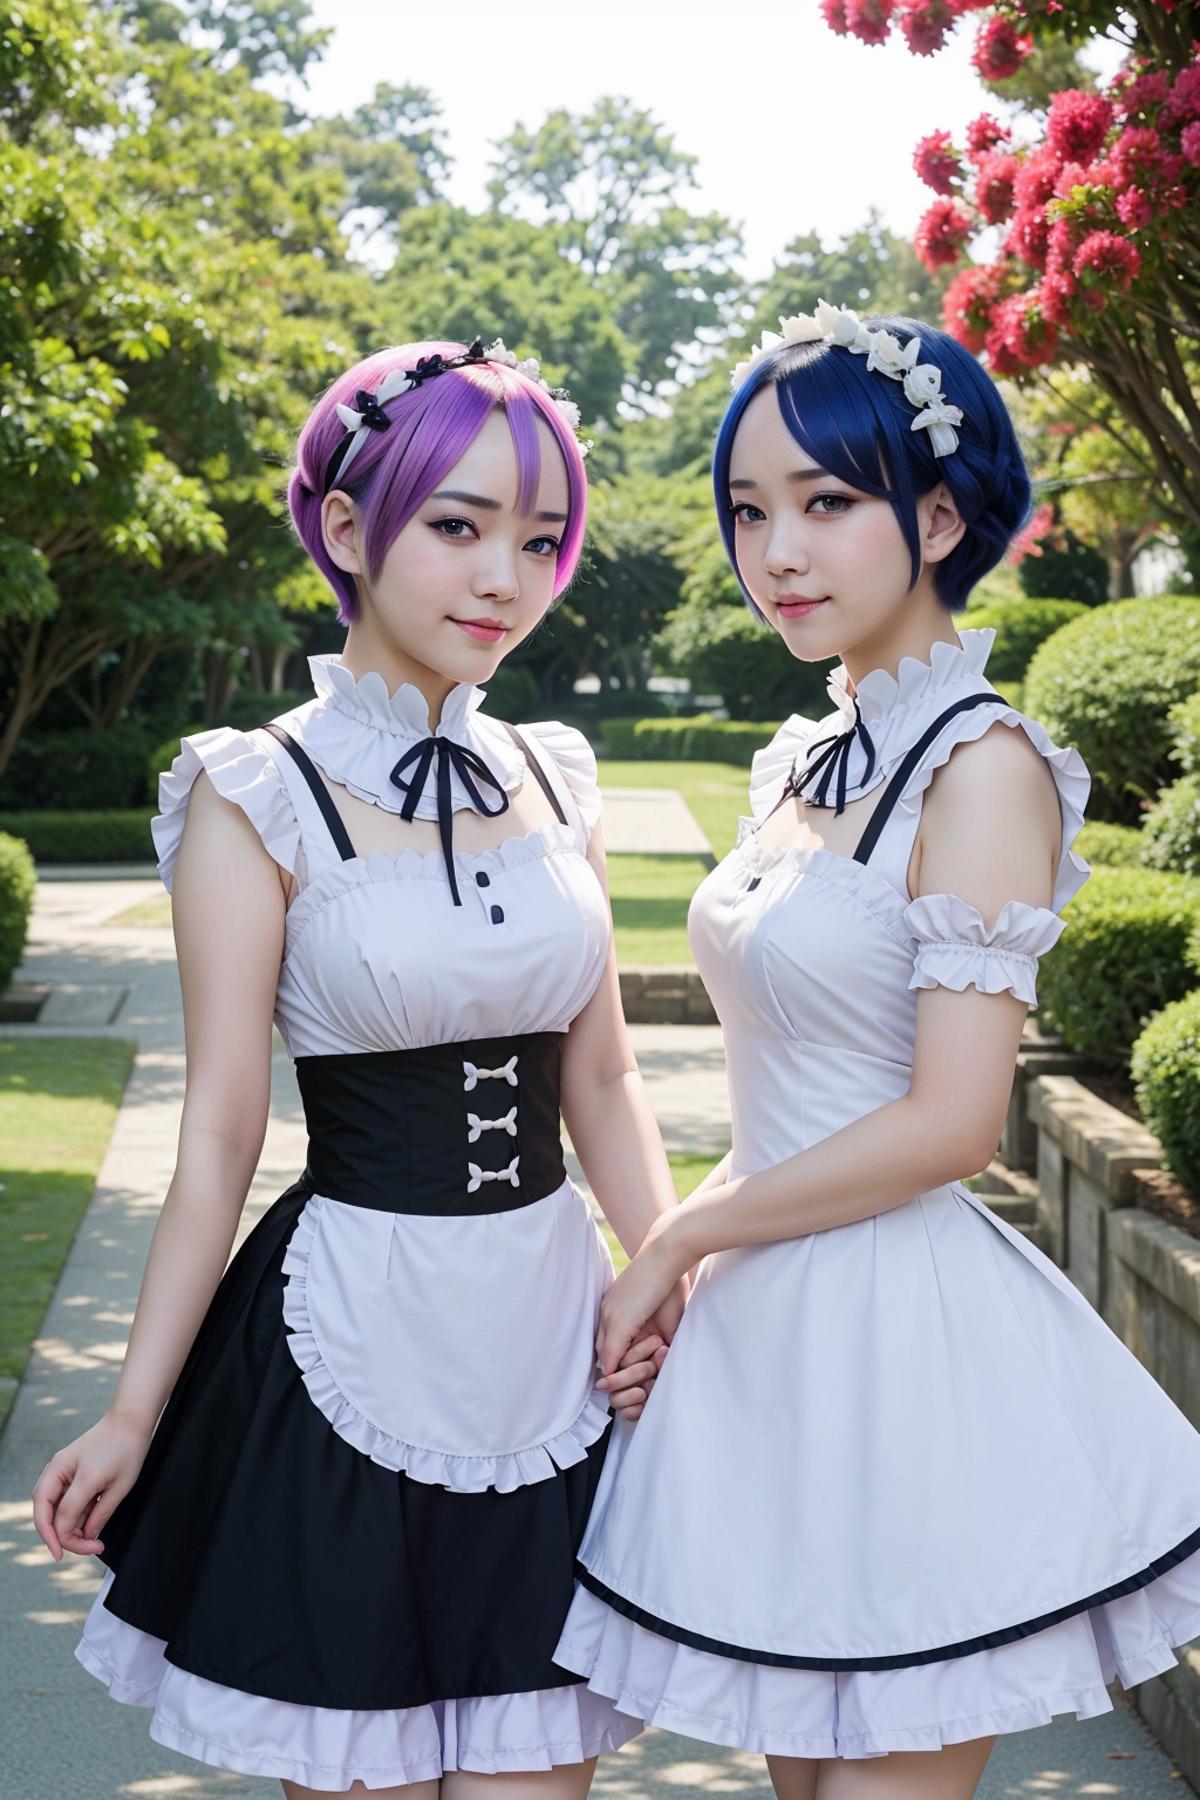 Rem & Ram & Emilia | Re:Zero Roswaal Mansion Pack image by lolomind